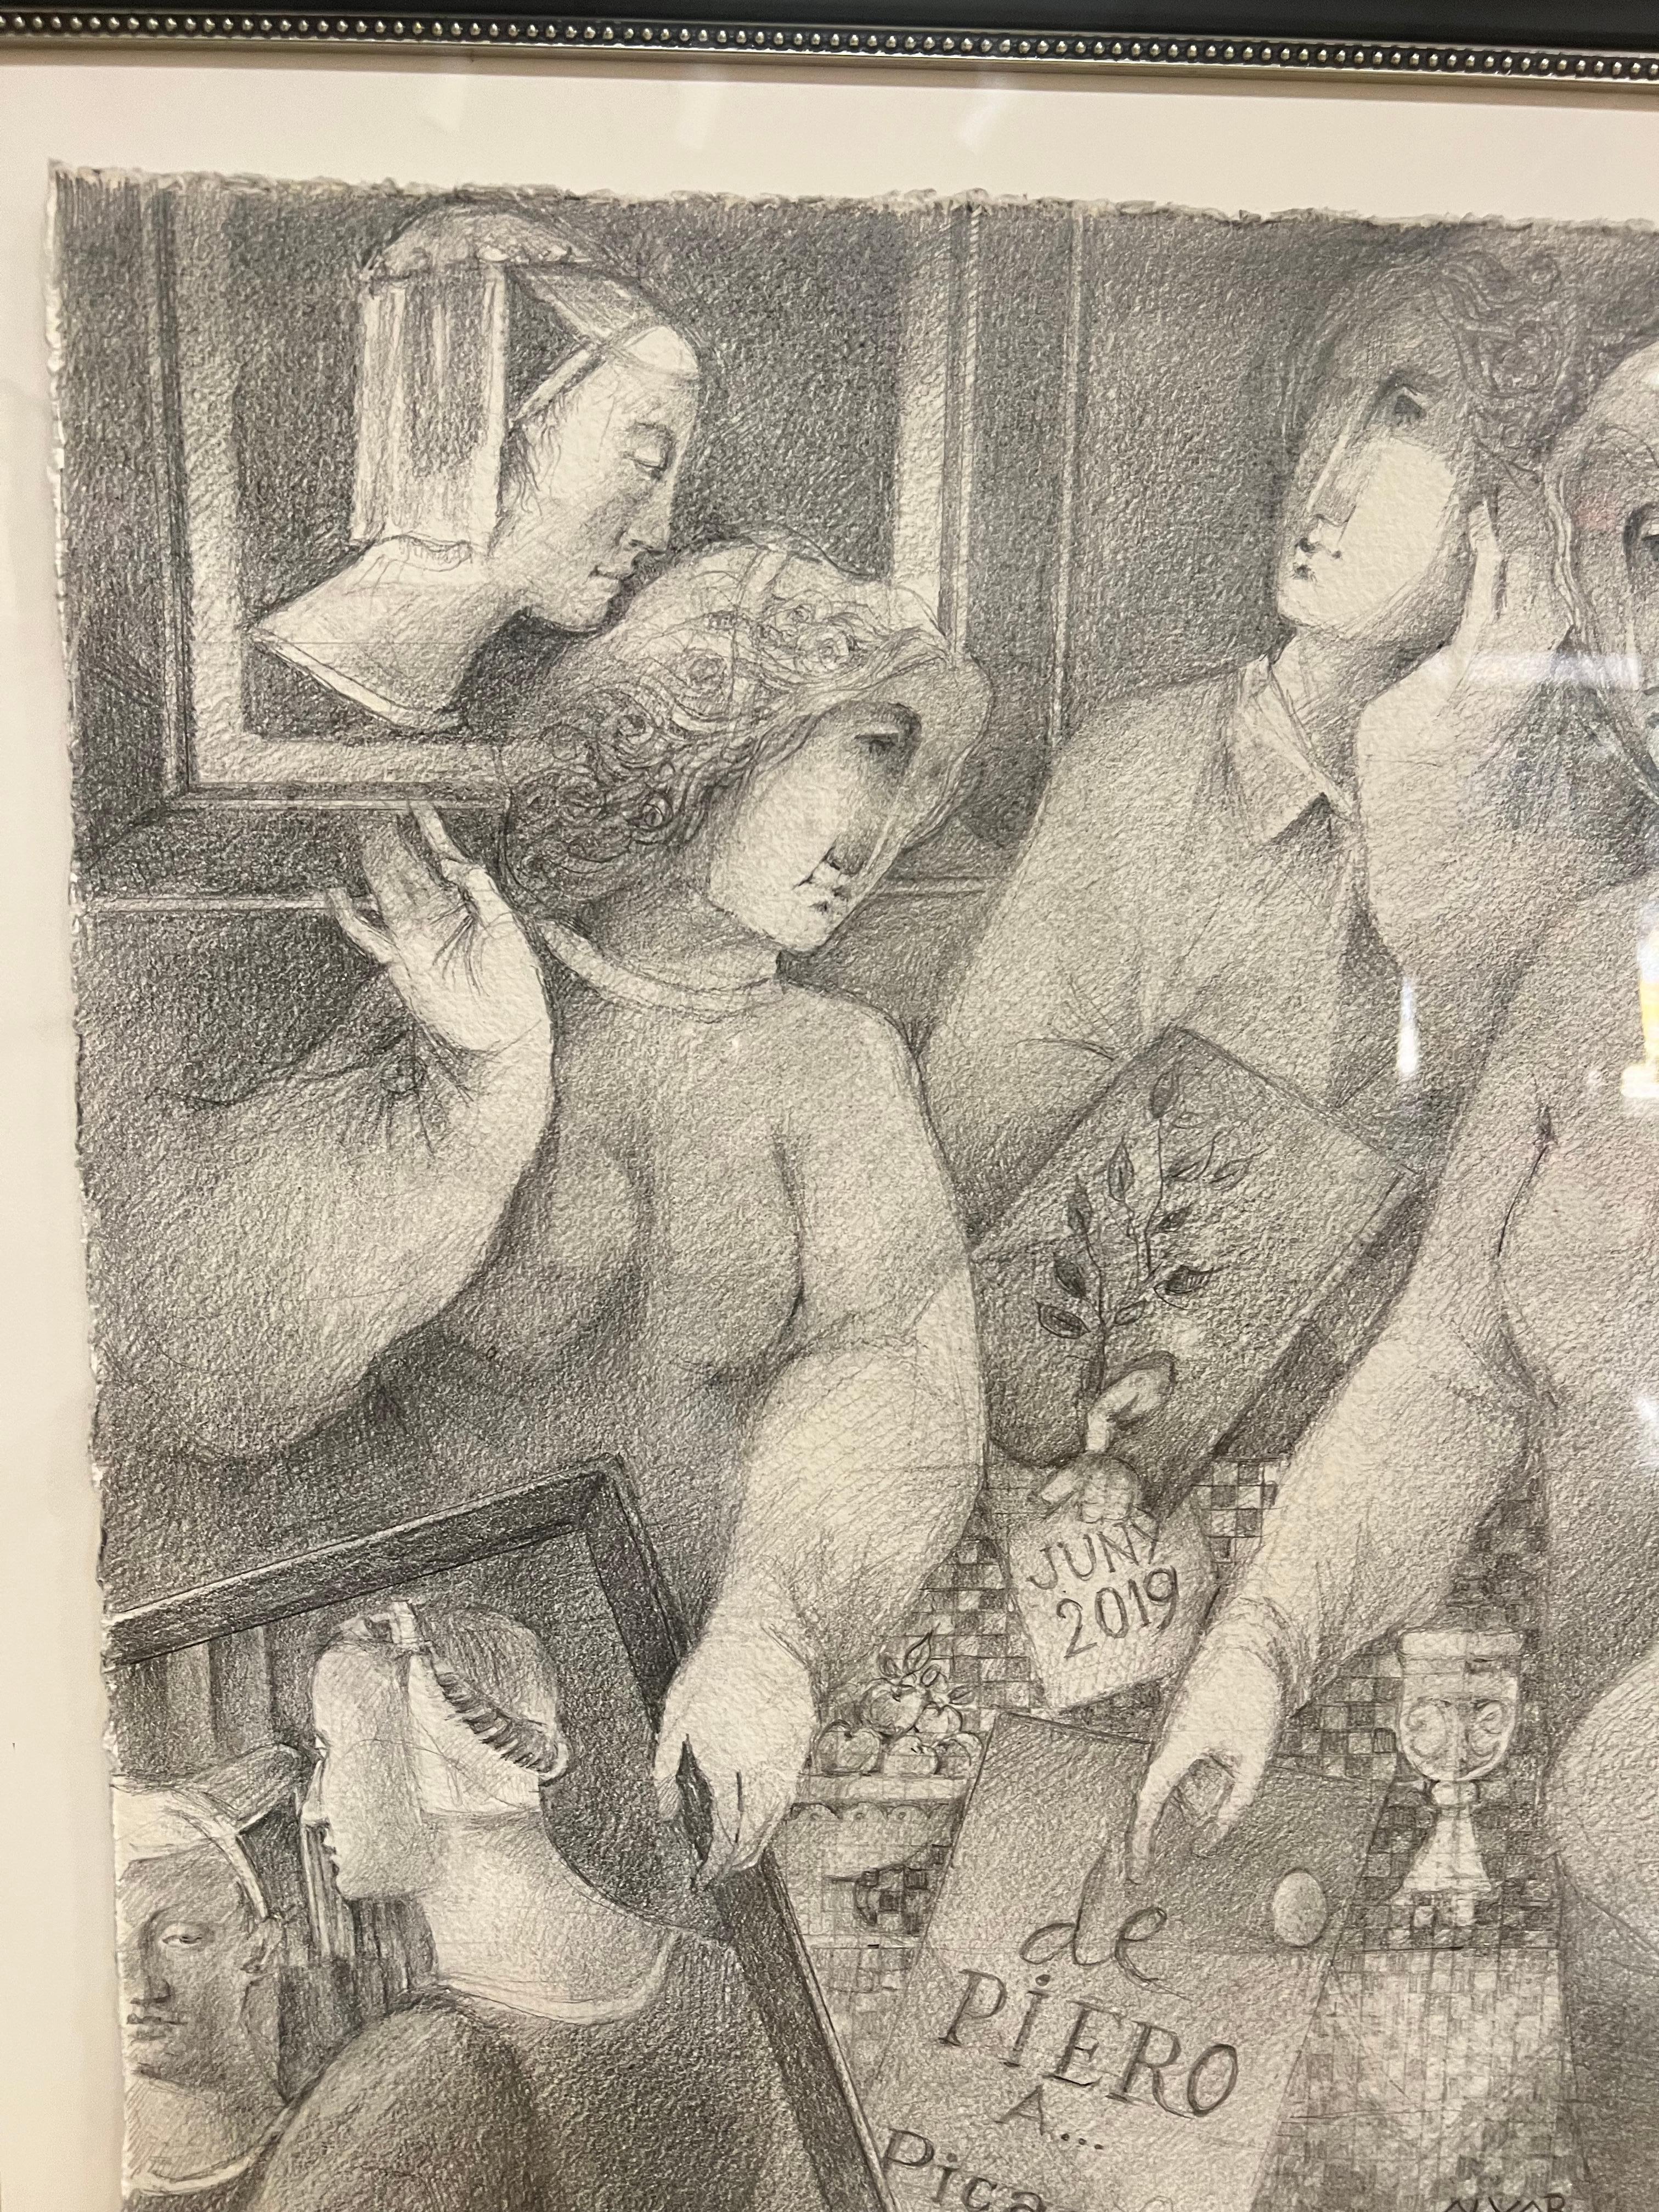 This graphite drawing on paper is in excellent condition and and has only been shown in a gallery setting. The size dimensions do not include the frame.  

Alvar pays homage to two of his favorite artists in De Piero a Picasso. Early Renaissance